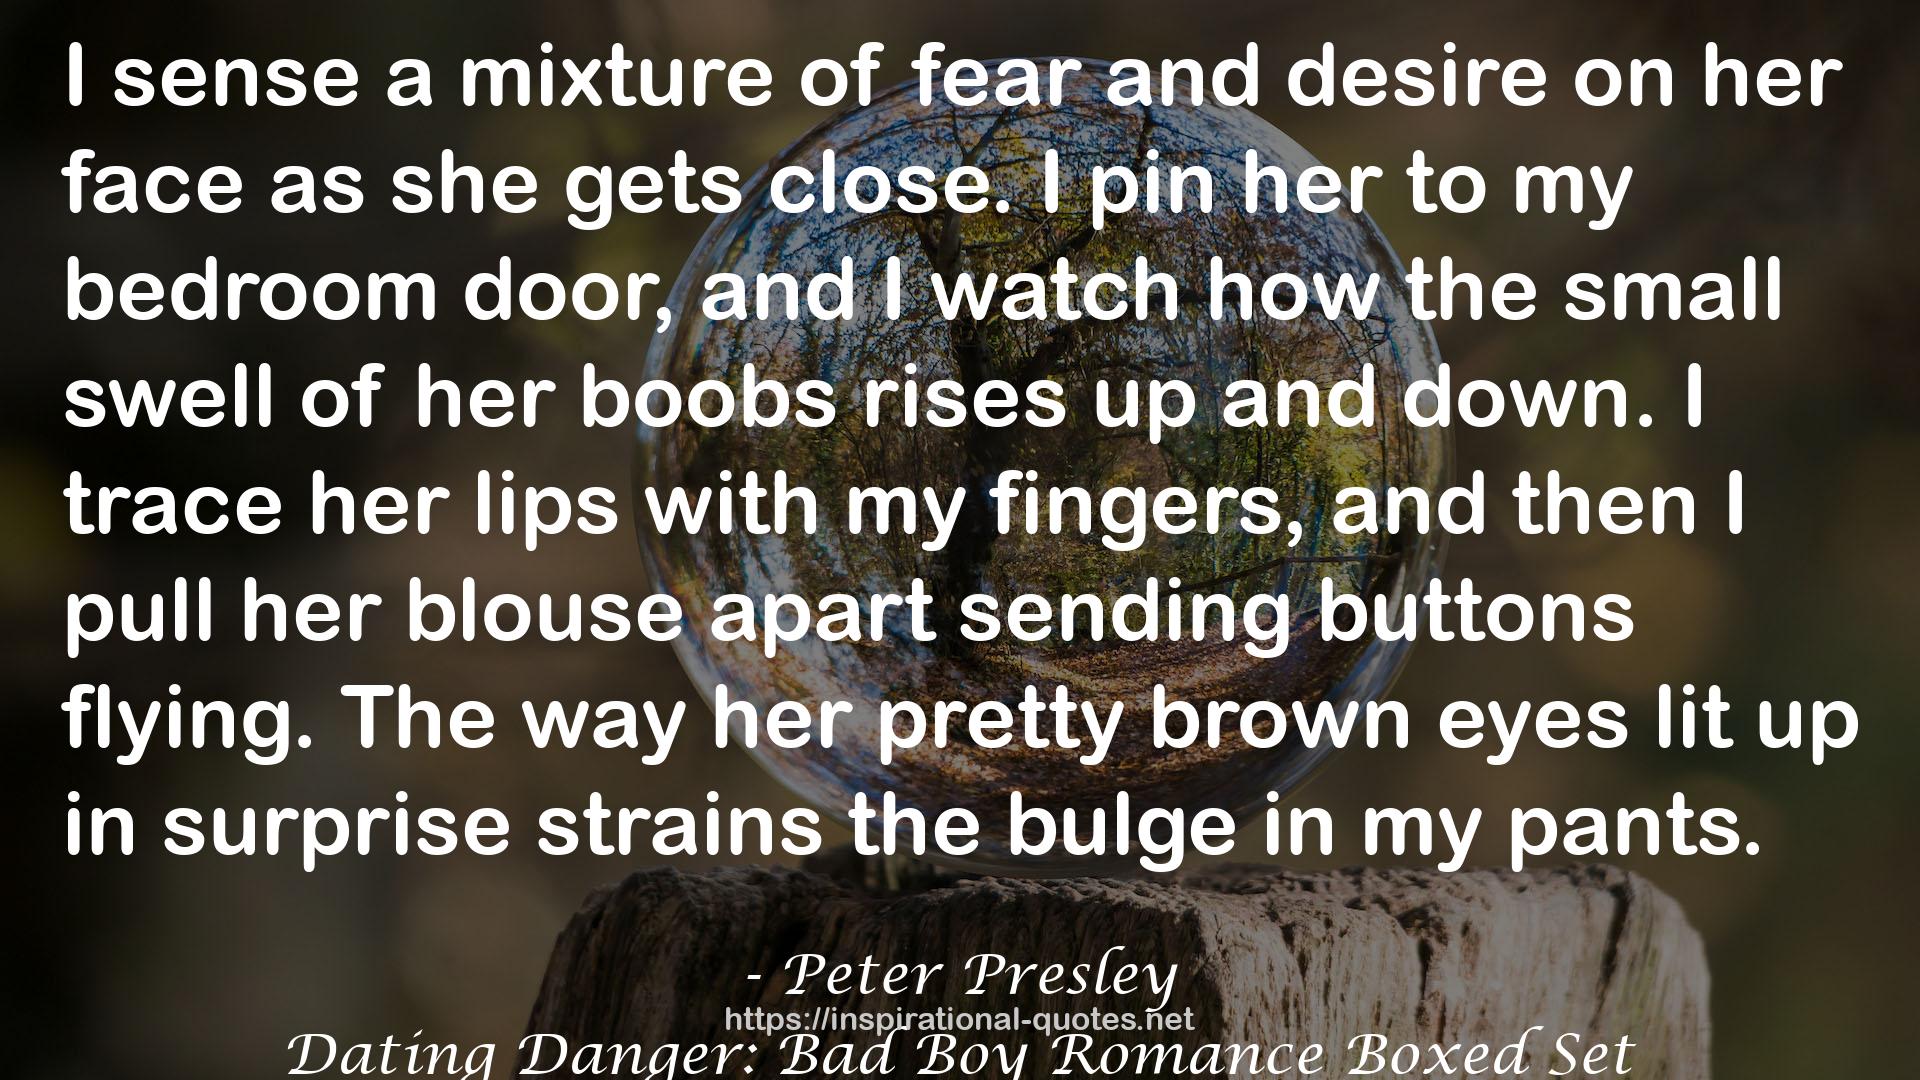 Peter Presley QUOTES